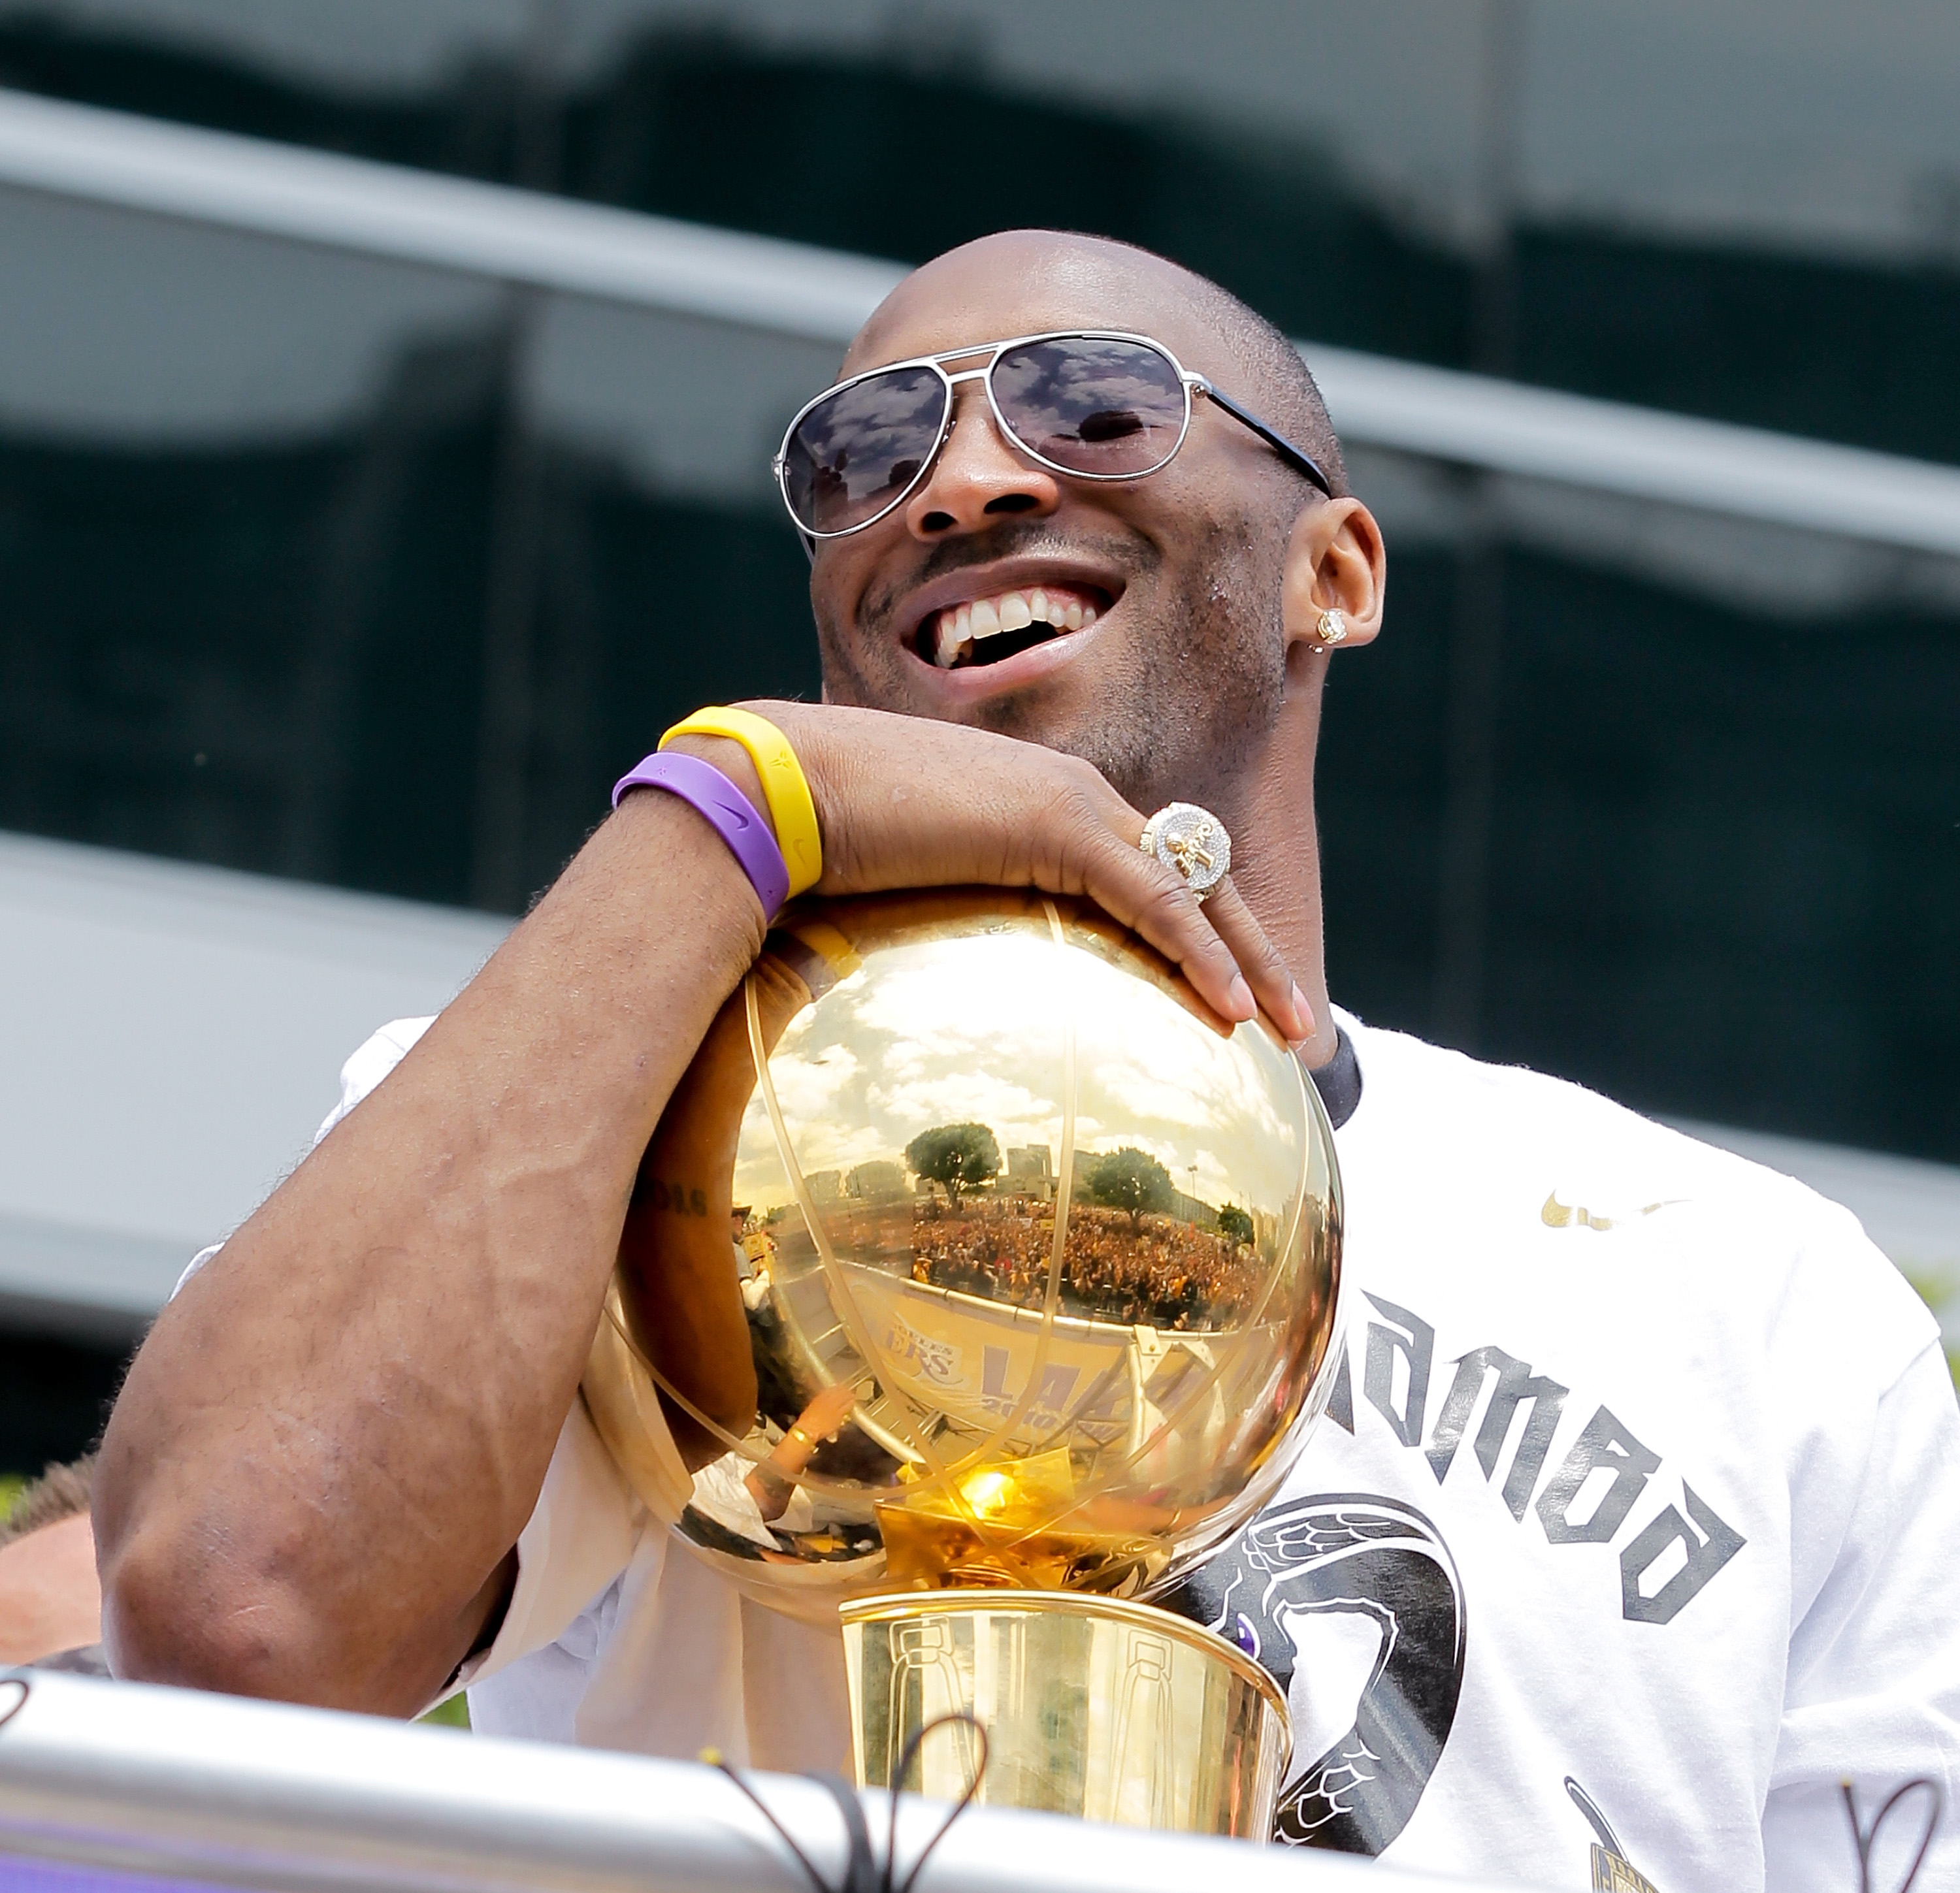 LOS ANGELES, CA - JUNE 21:  Los Angeles Lakers guard Kobe Bryant laughs with the championship trophy while riding in the victory parade for the the NBA basketball champion team on June 21, 2010 in Los Angeles, California. The Lakers beat the Boston Celtic